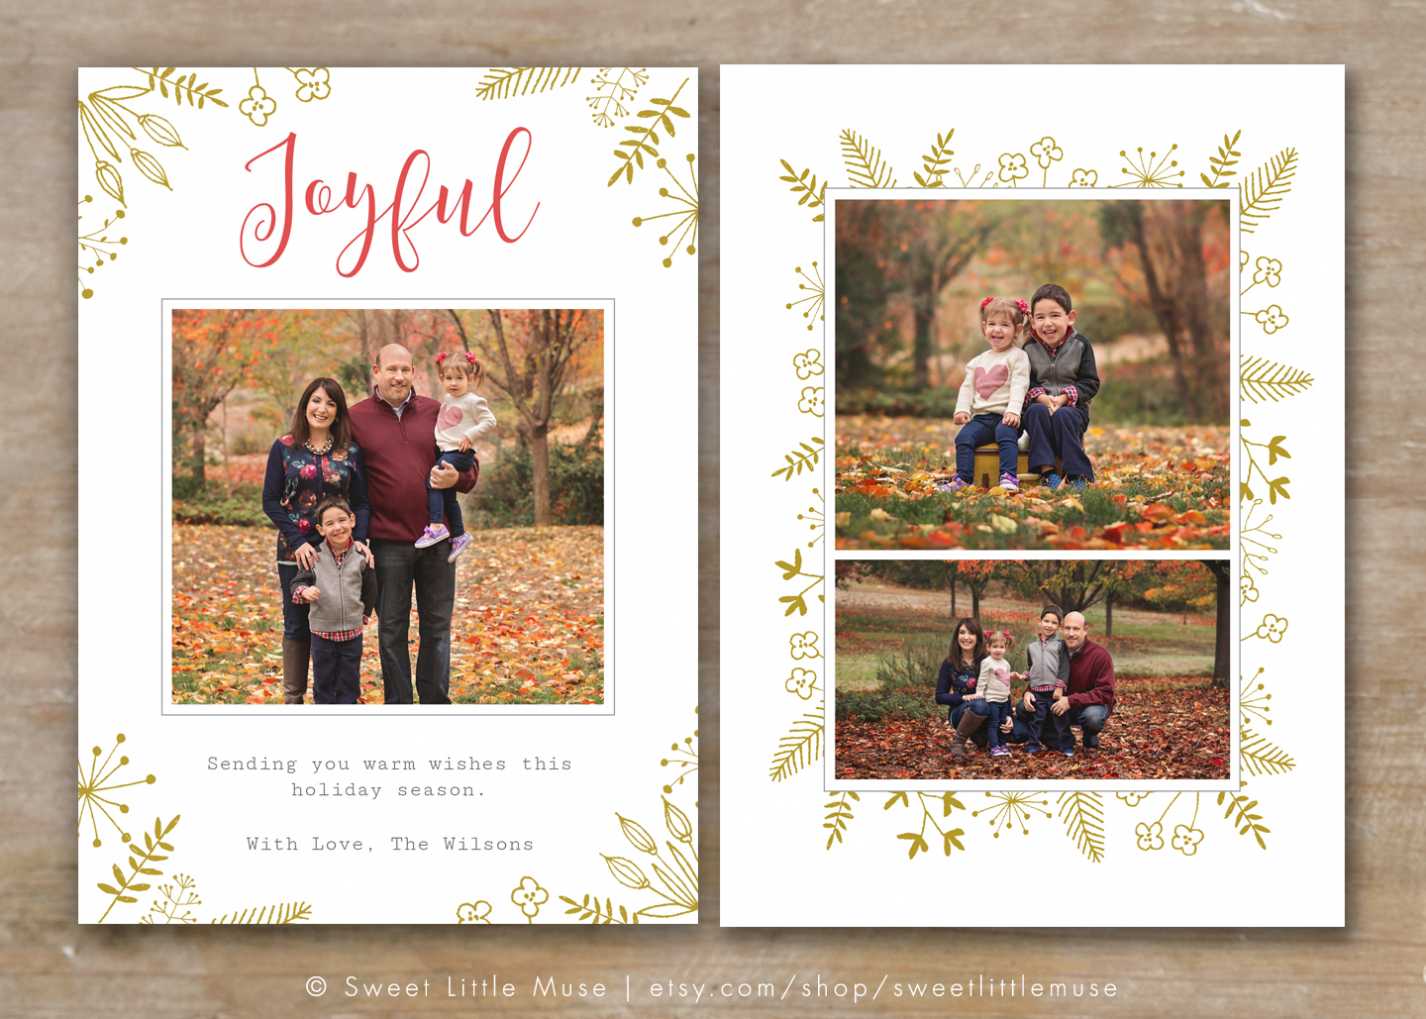 30 Holiday Card Templates For Photographers To Use This Year pertaining to Free Christmas Card Templates For Photographers